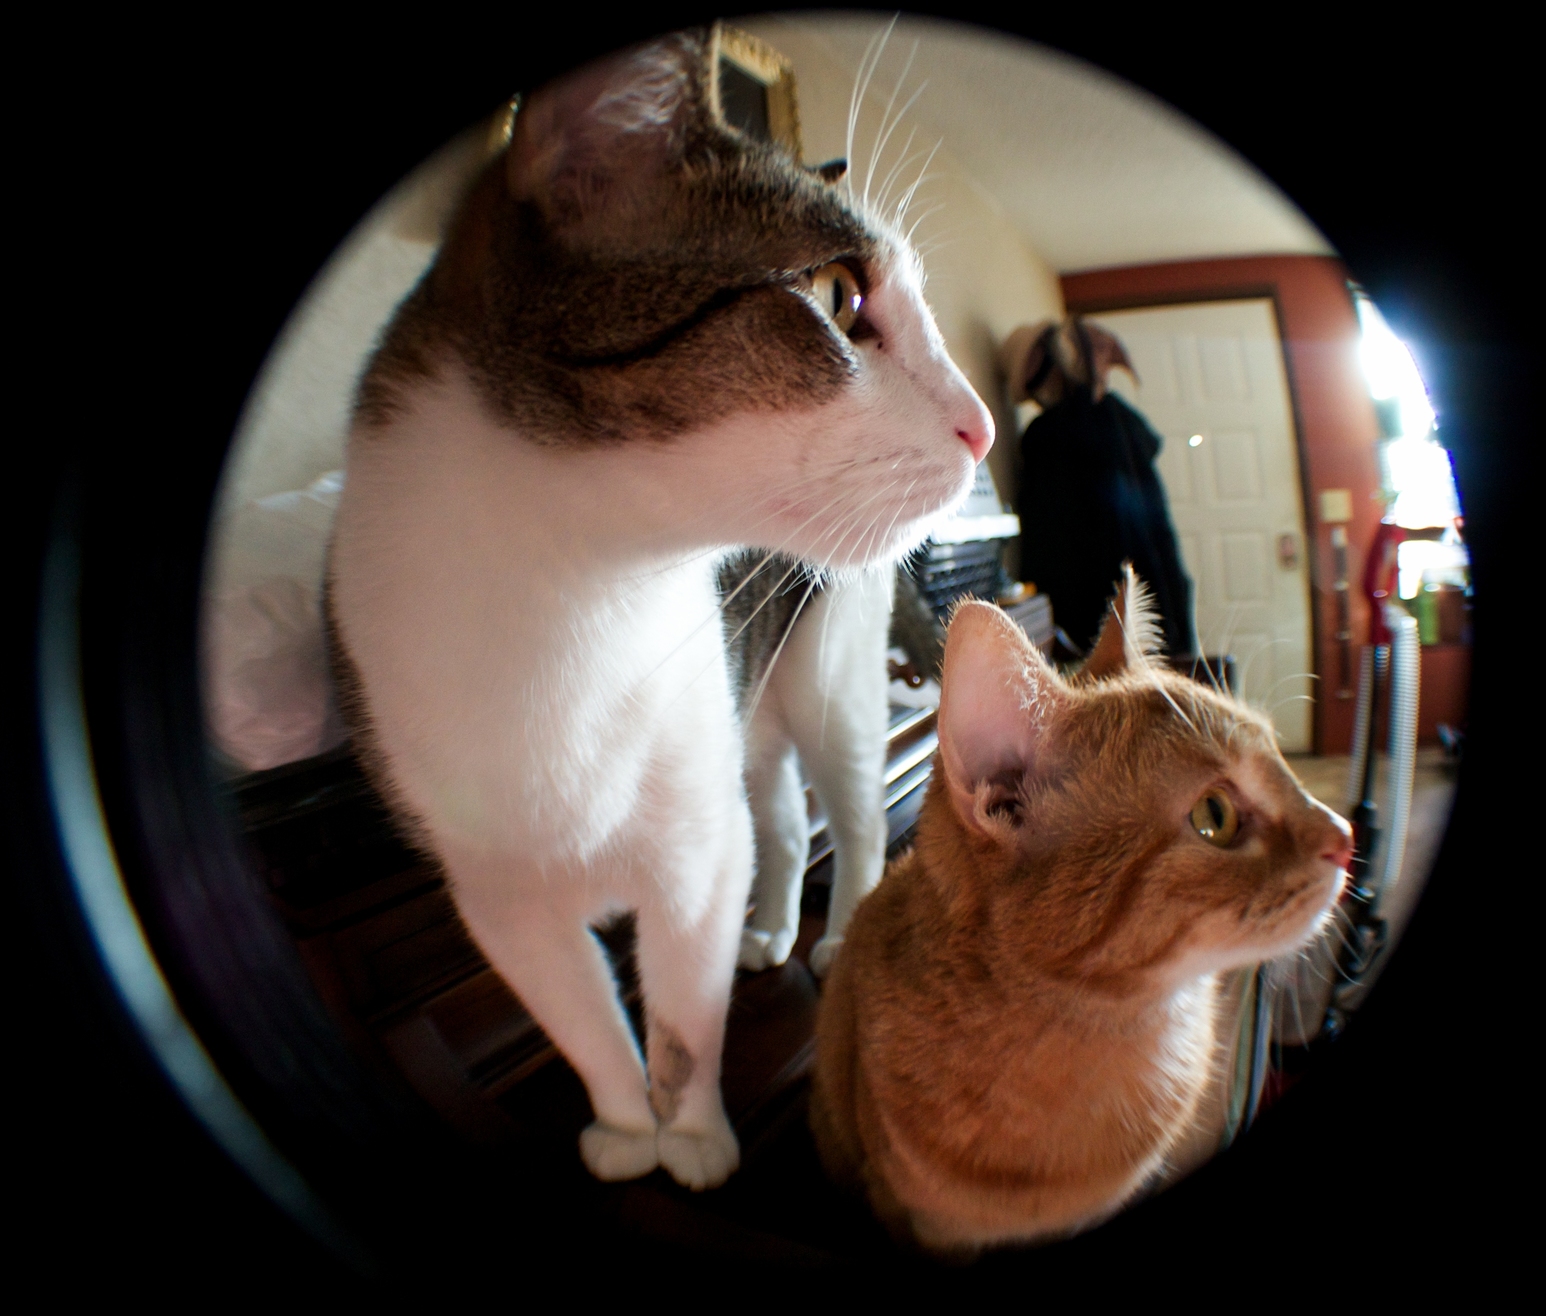 Sirius and weasley being great models for me to test out a new lens.